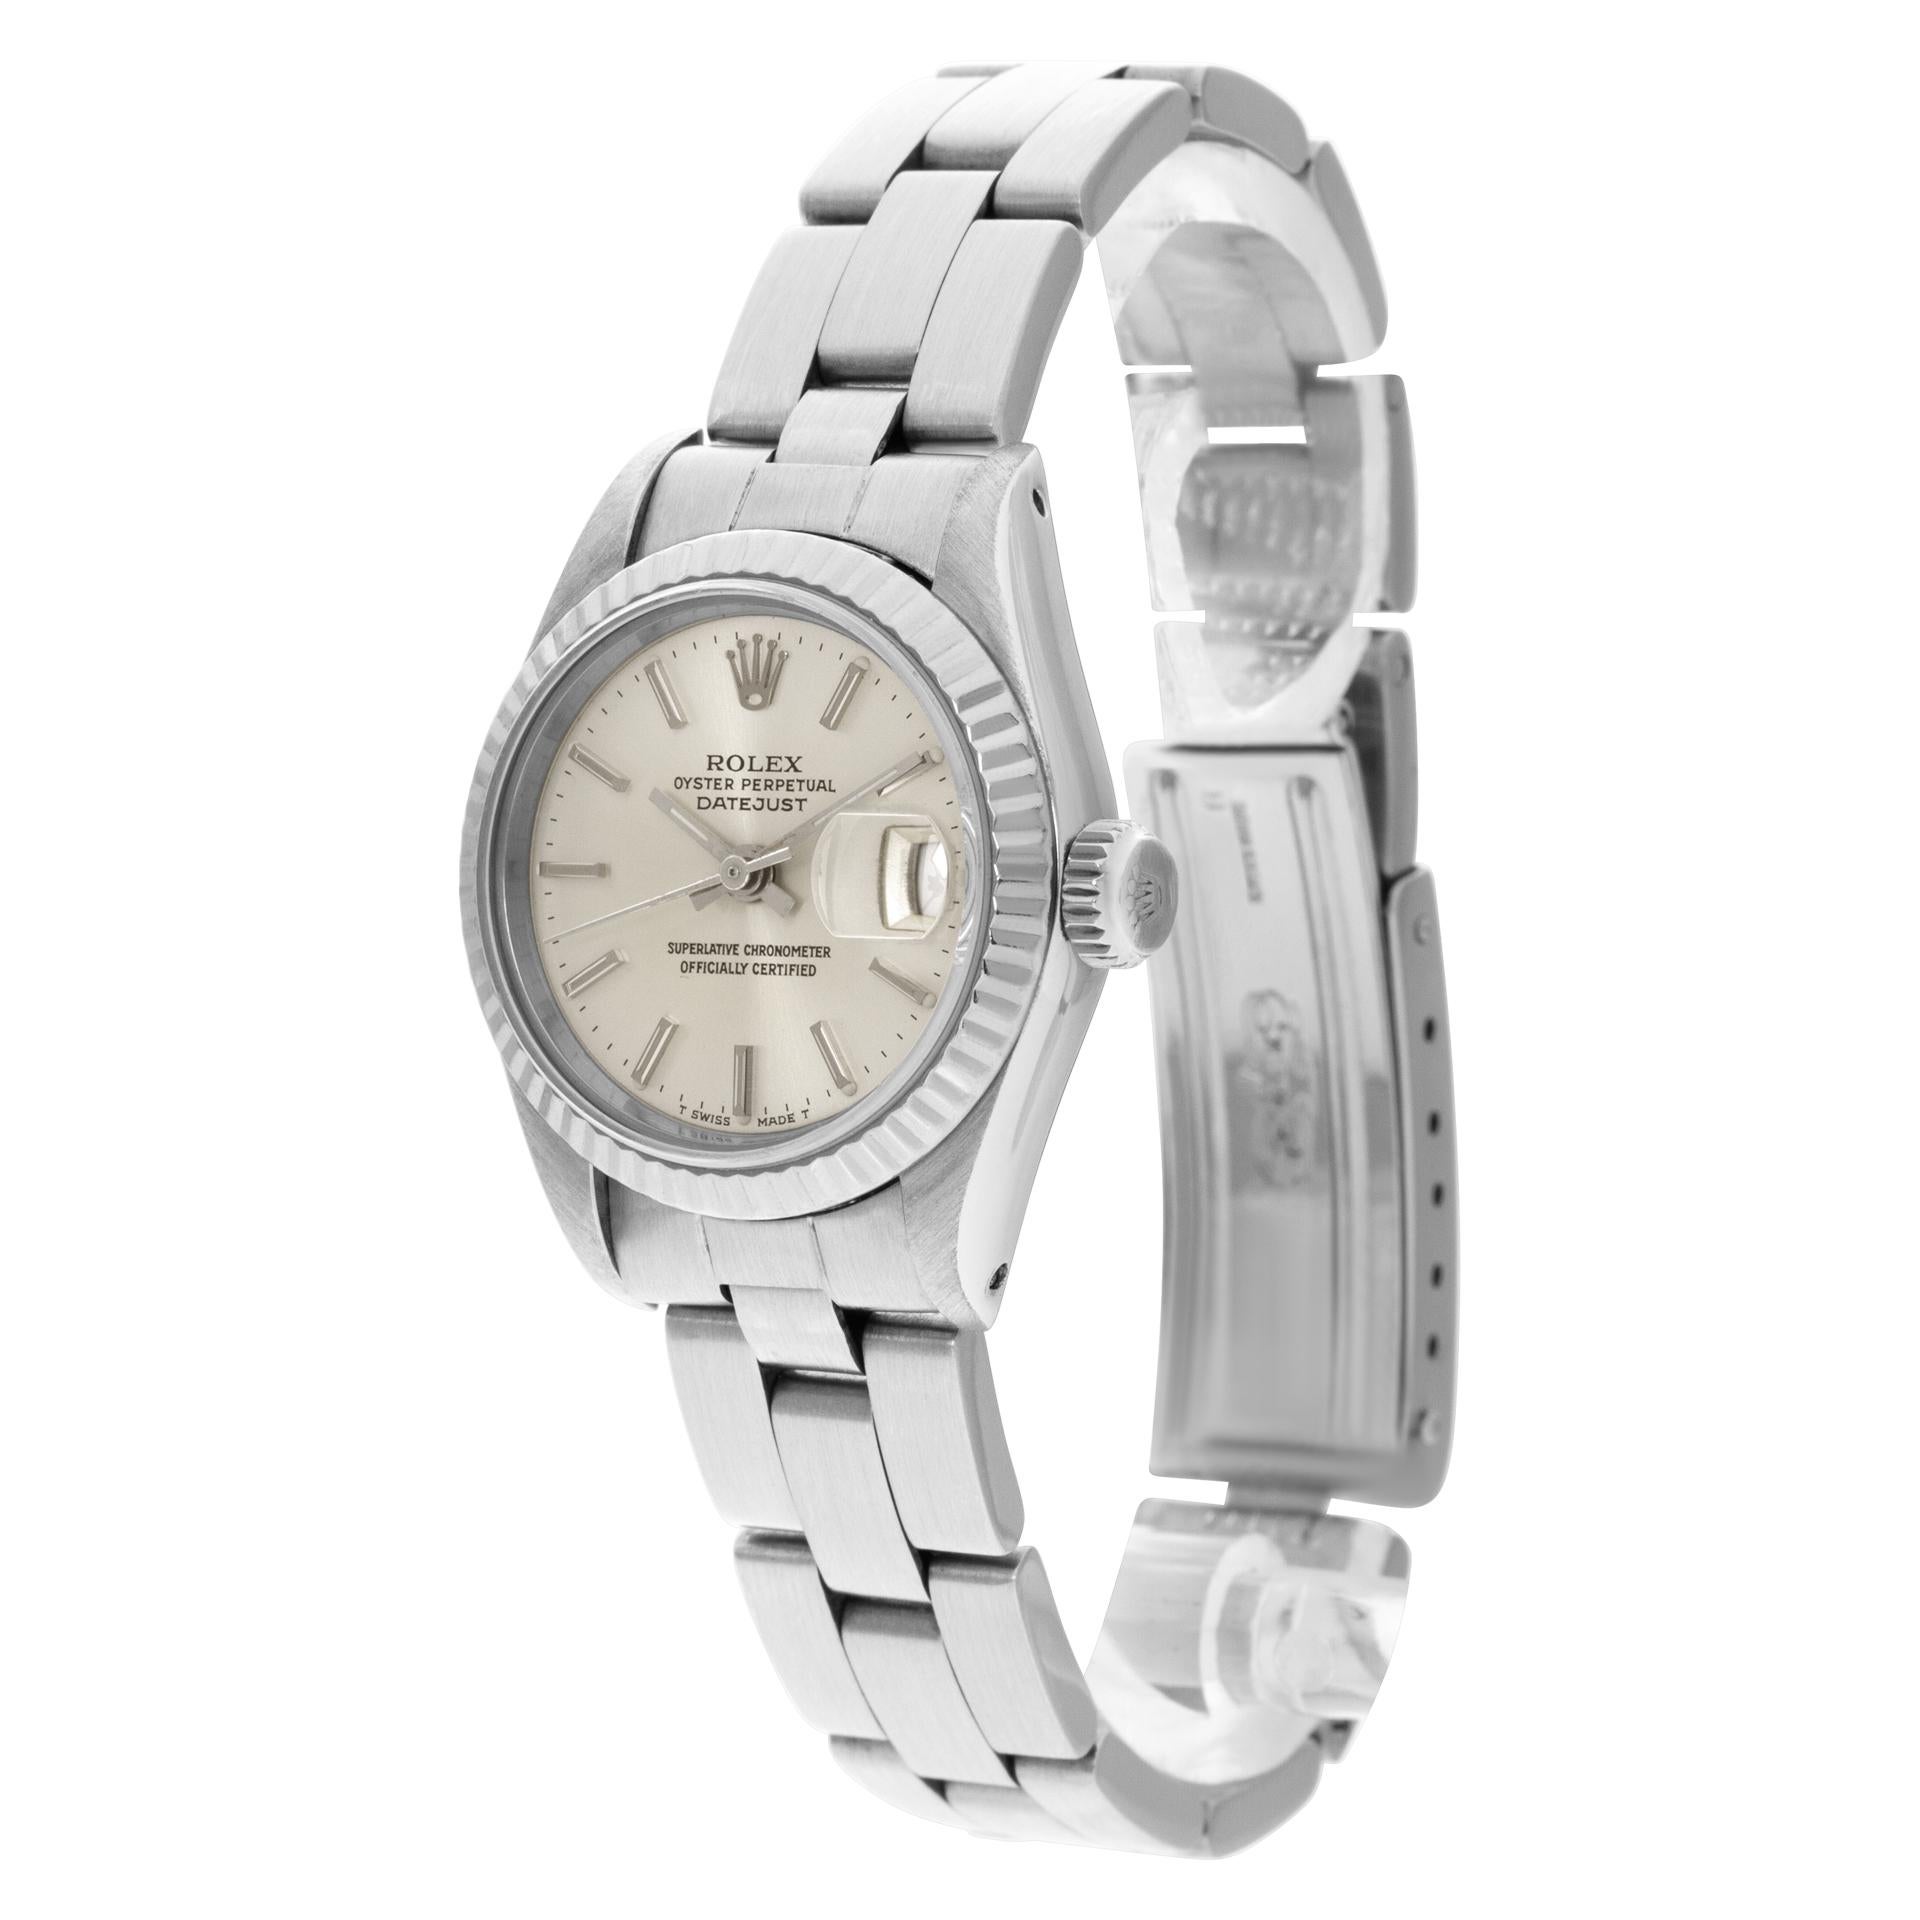 Rolex Datejust in stainless steel with 18k white gold bezel. Auto w/ sweep seconds and date. Case size 26mm. Ref 69174. Circa 1987. Fine Pre-owned Rolex Watch.   Certified preowned Classic Rolex Datejust 69174 watch is made out of Stainless steel on